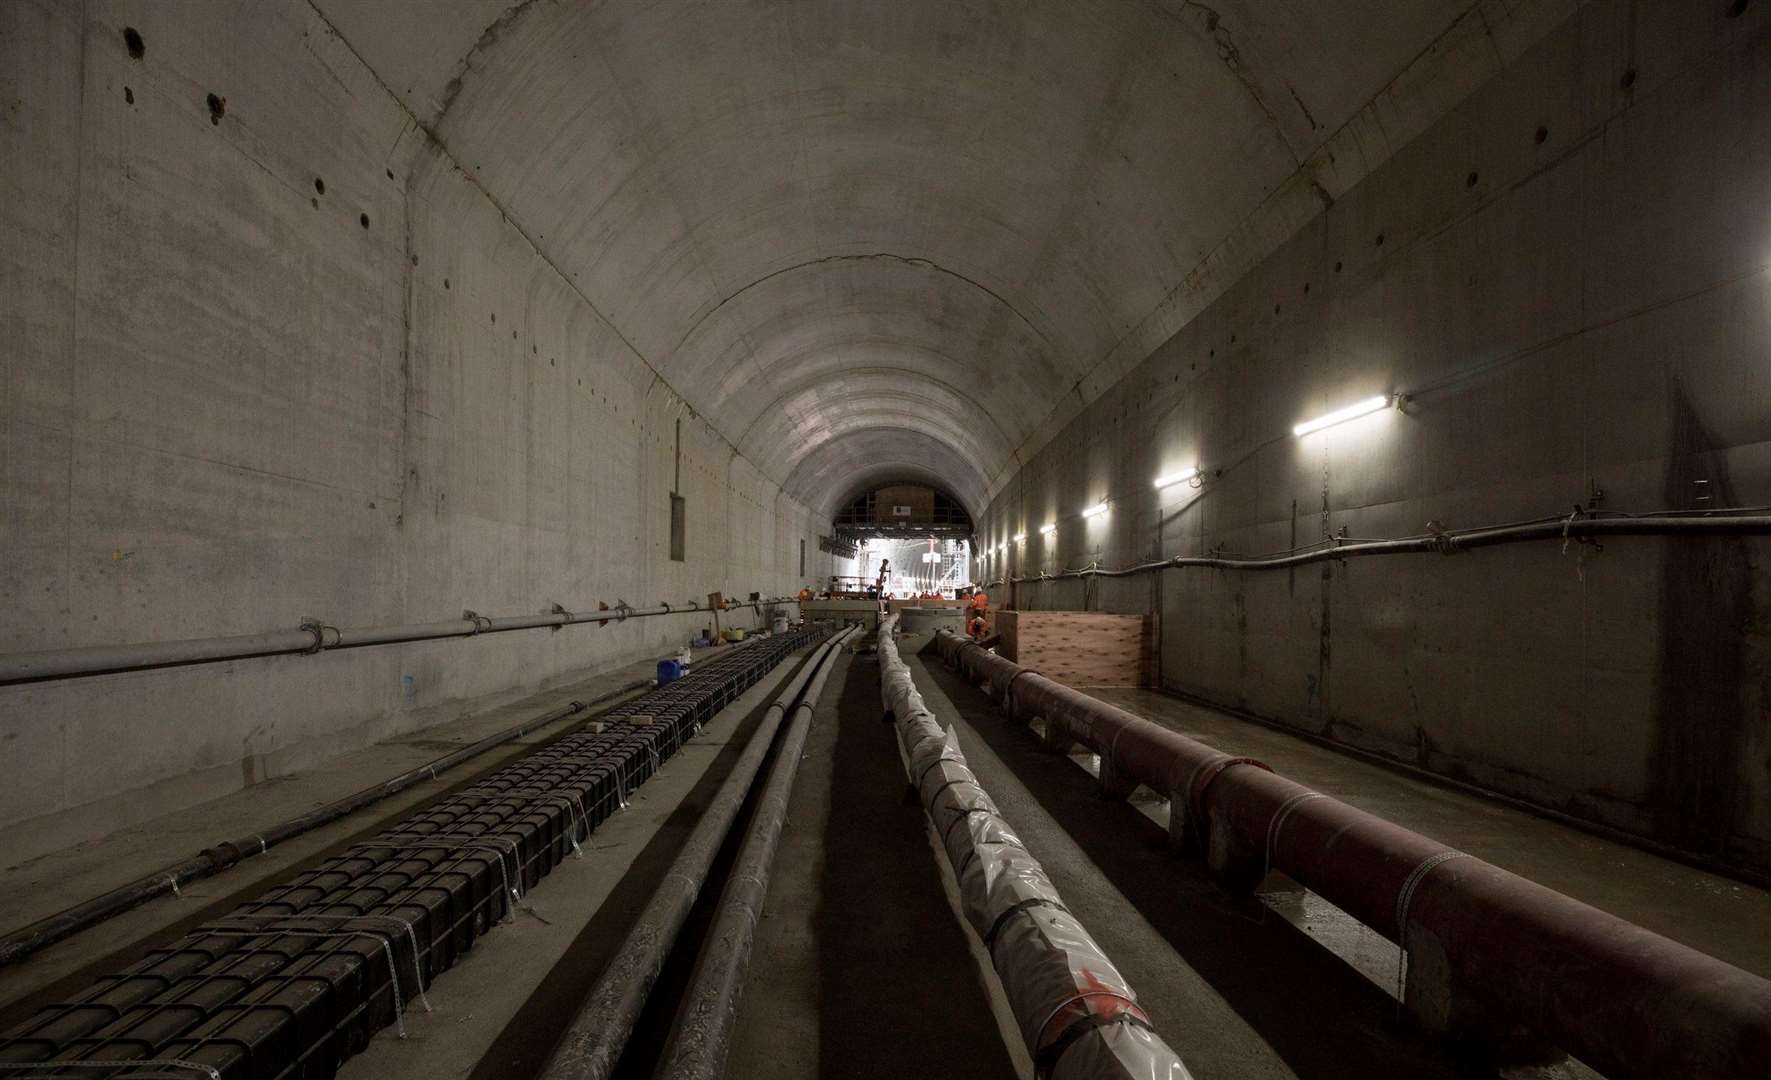 Work is underway on the Silvertown Tunnel. Picture: TfL